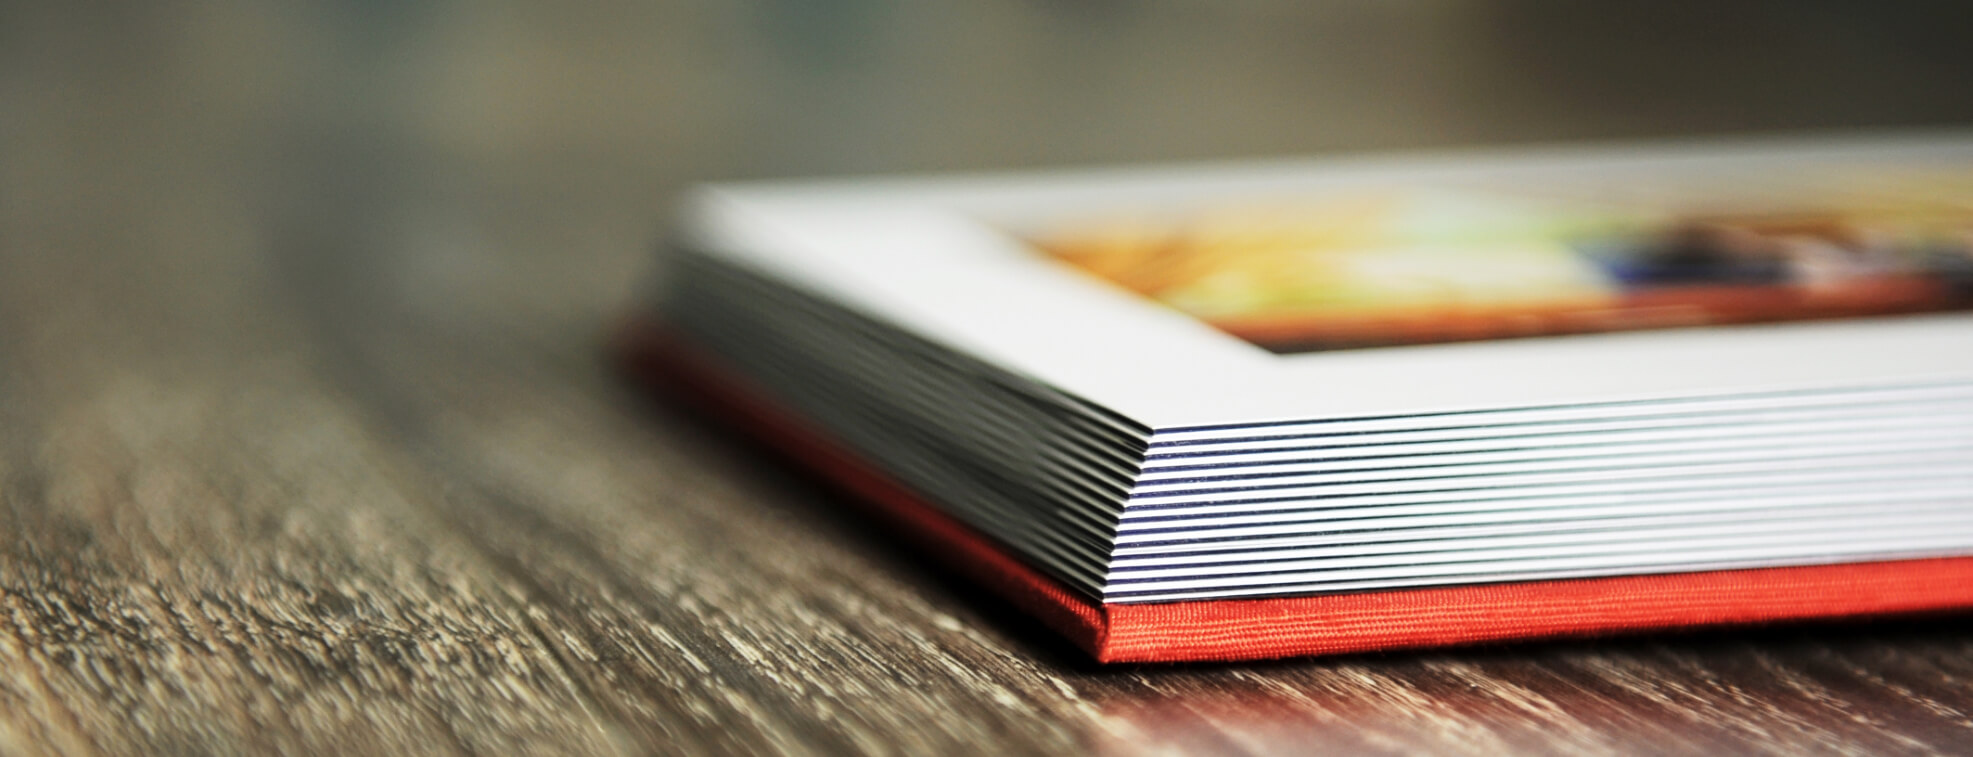 Close up of a photo book placed on a table